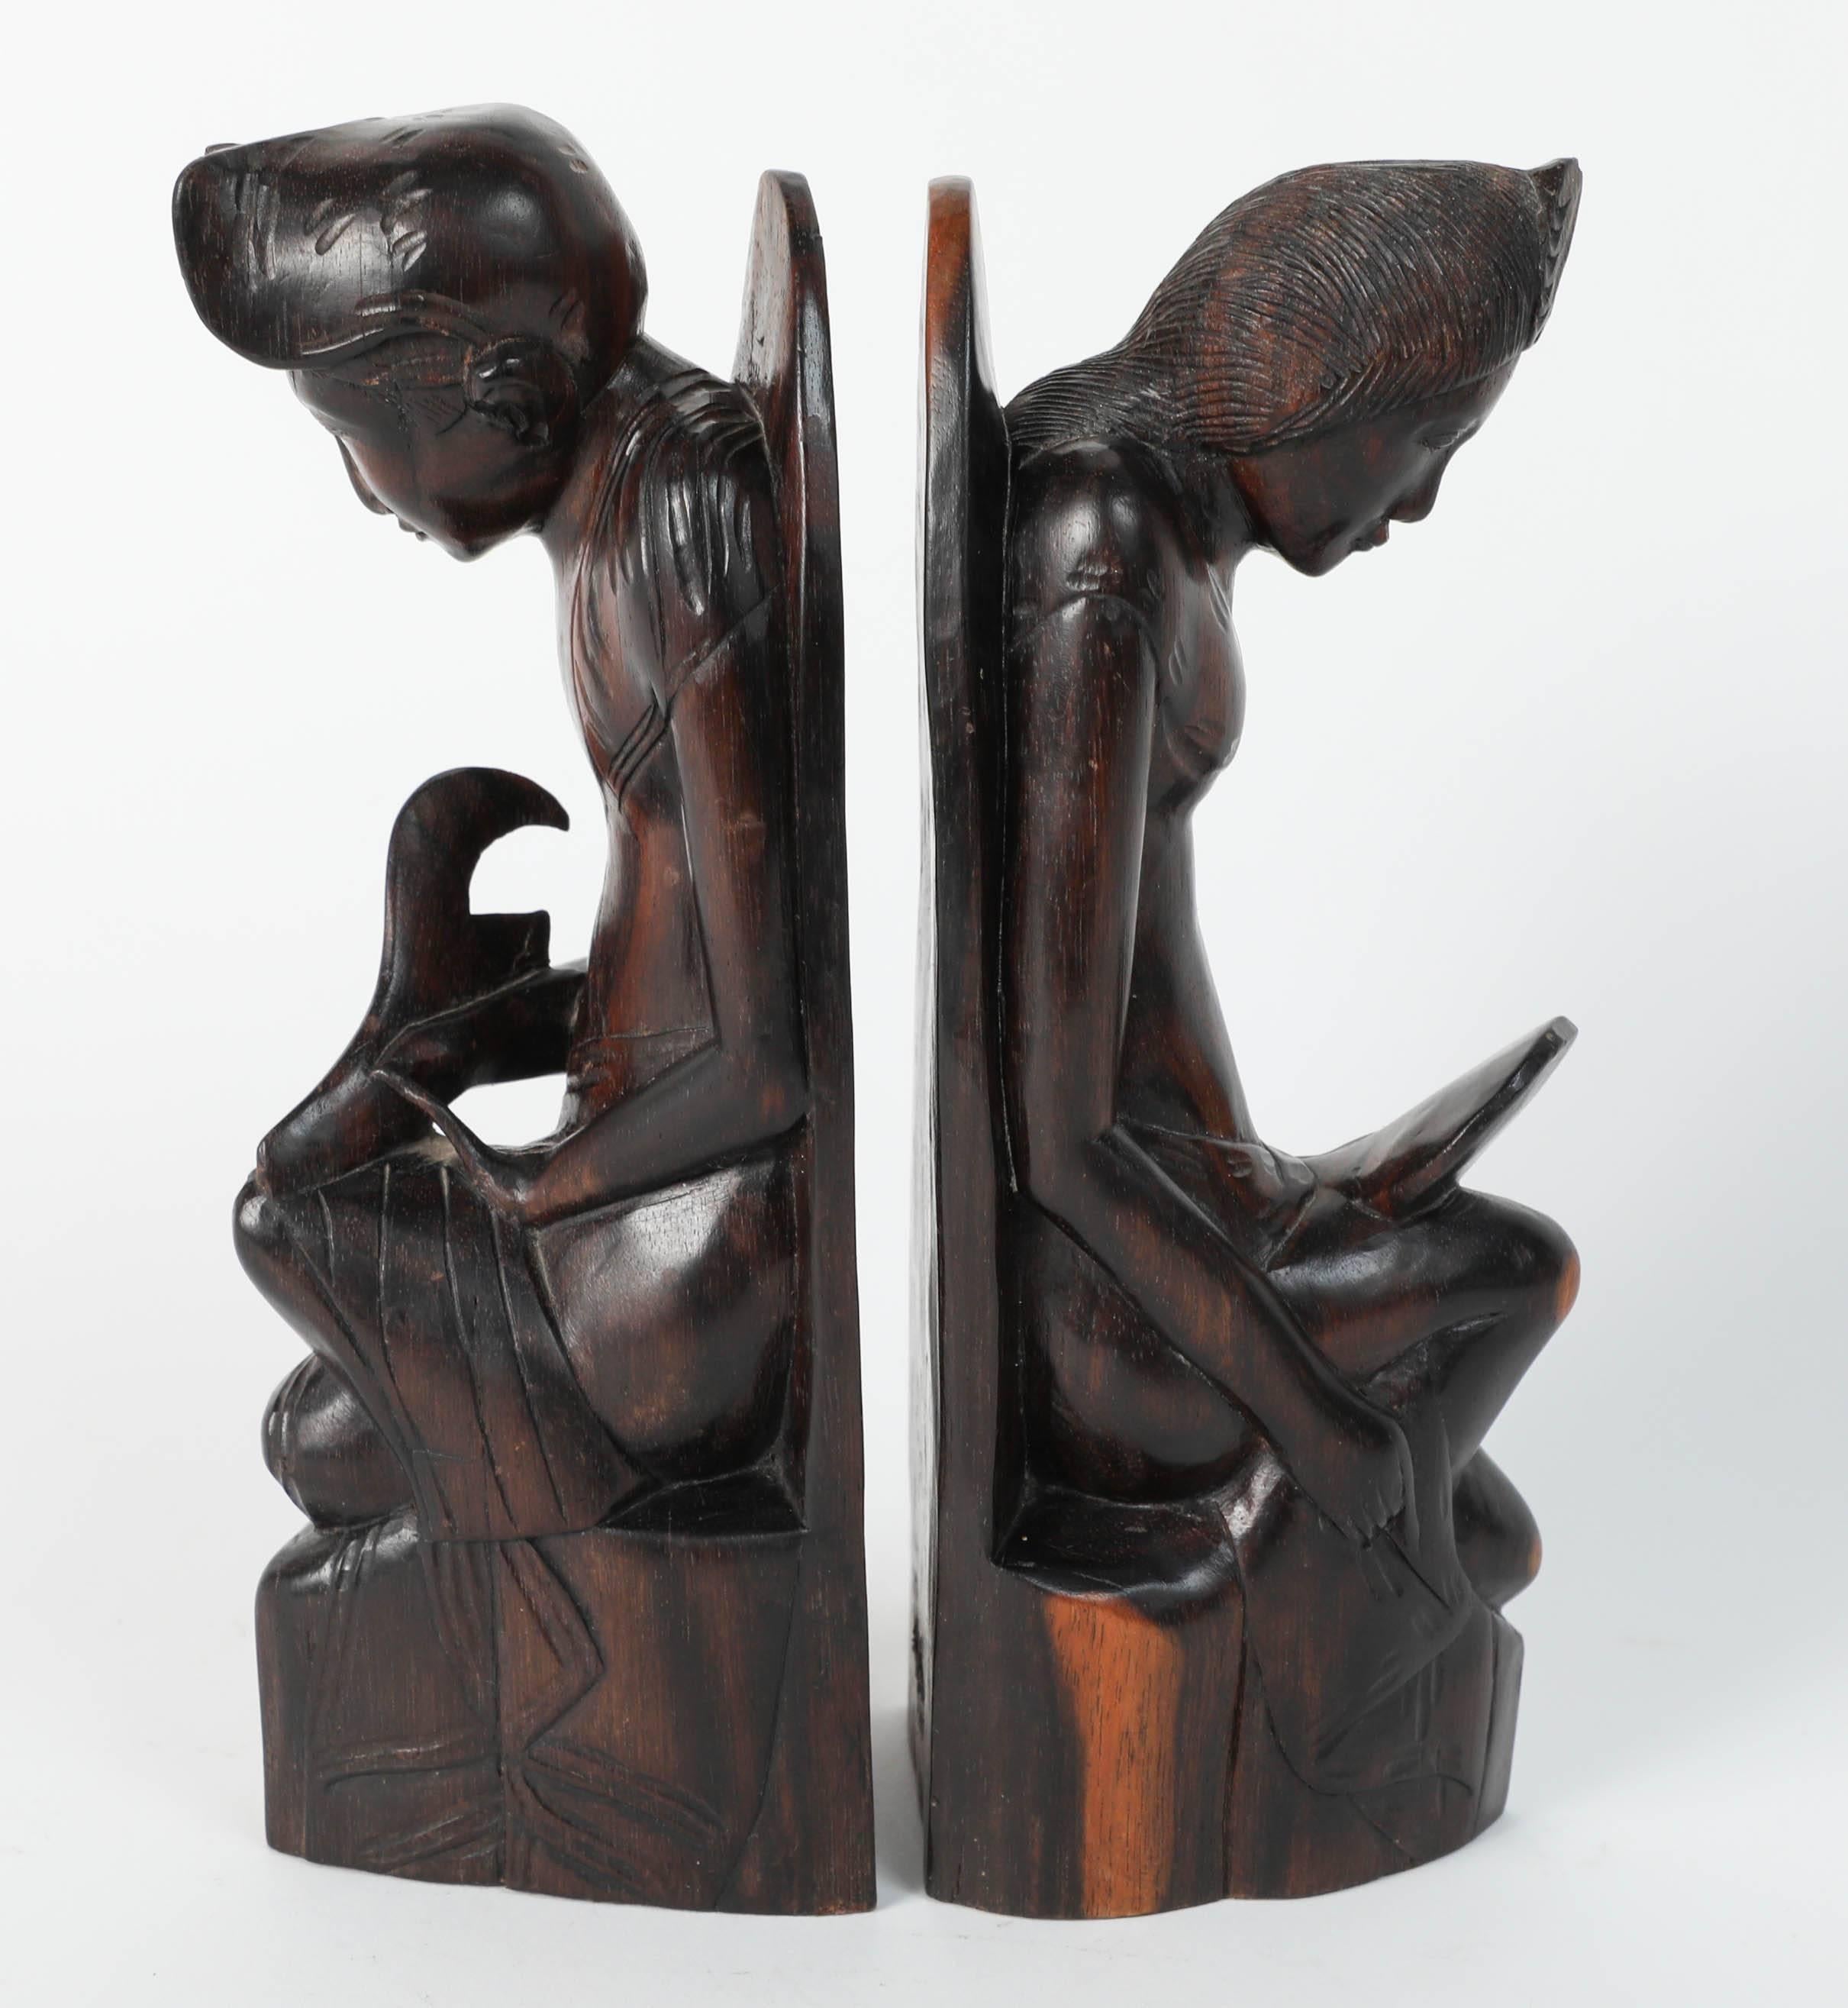 20th Century Hand-Carved Wooden Balinese Bookends